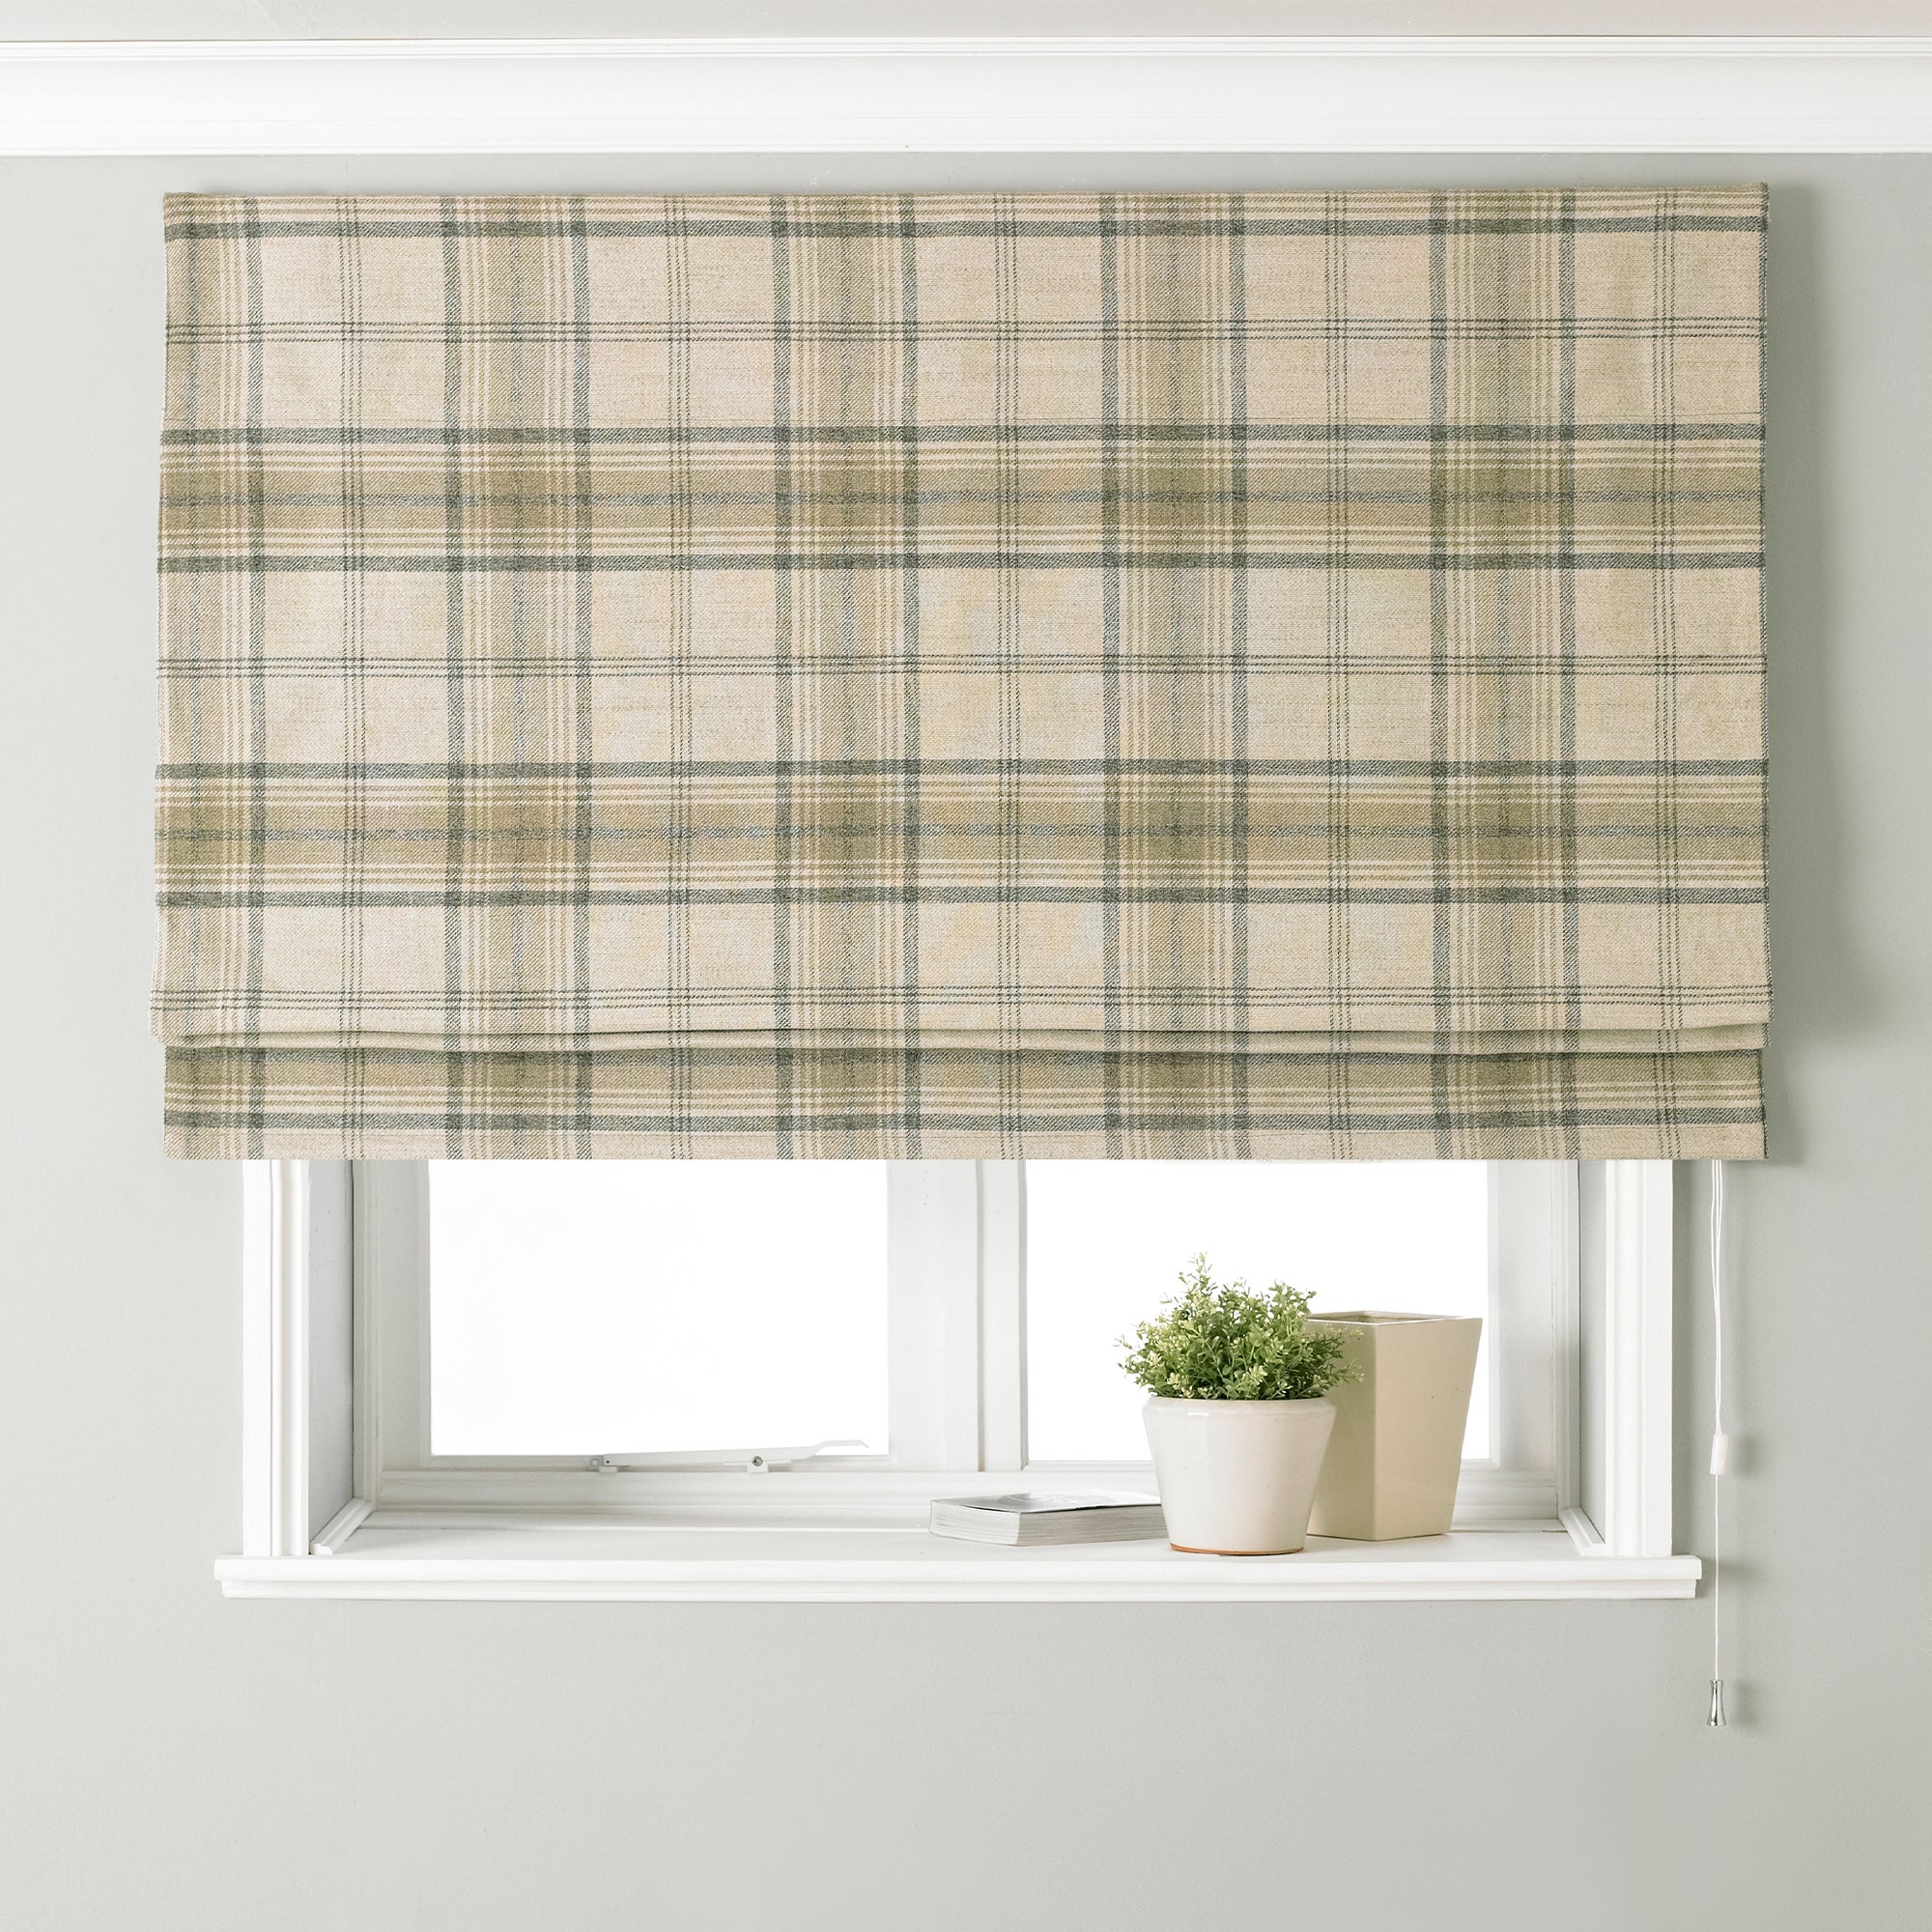 Photos - Blinds A&D Aviemore Natural Roman Blind Beige, Brown and Black 